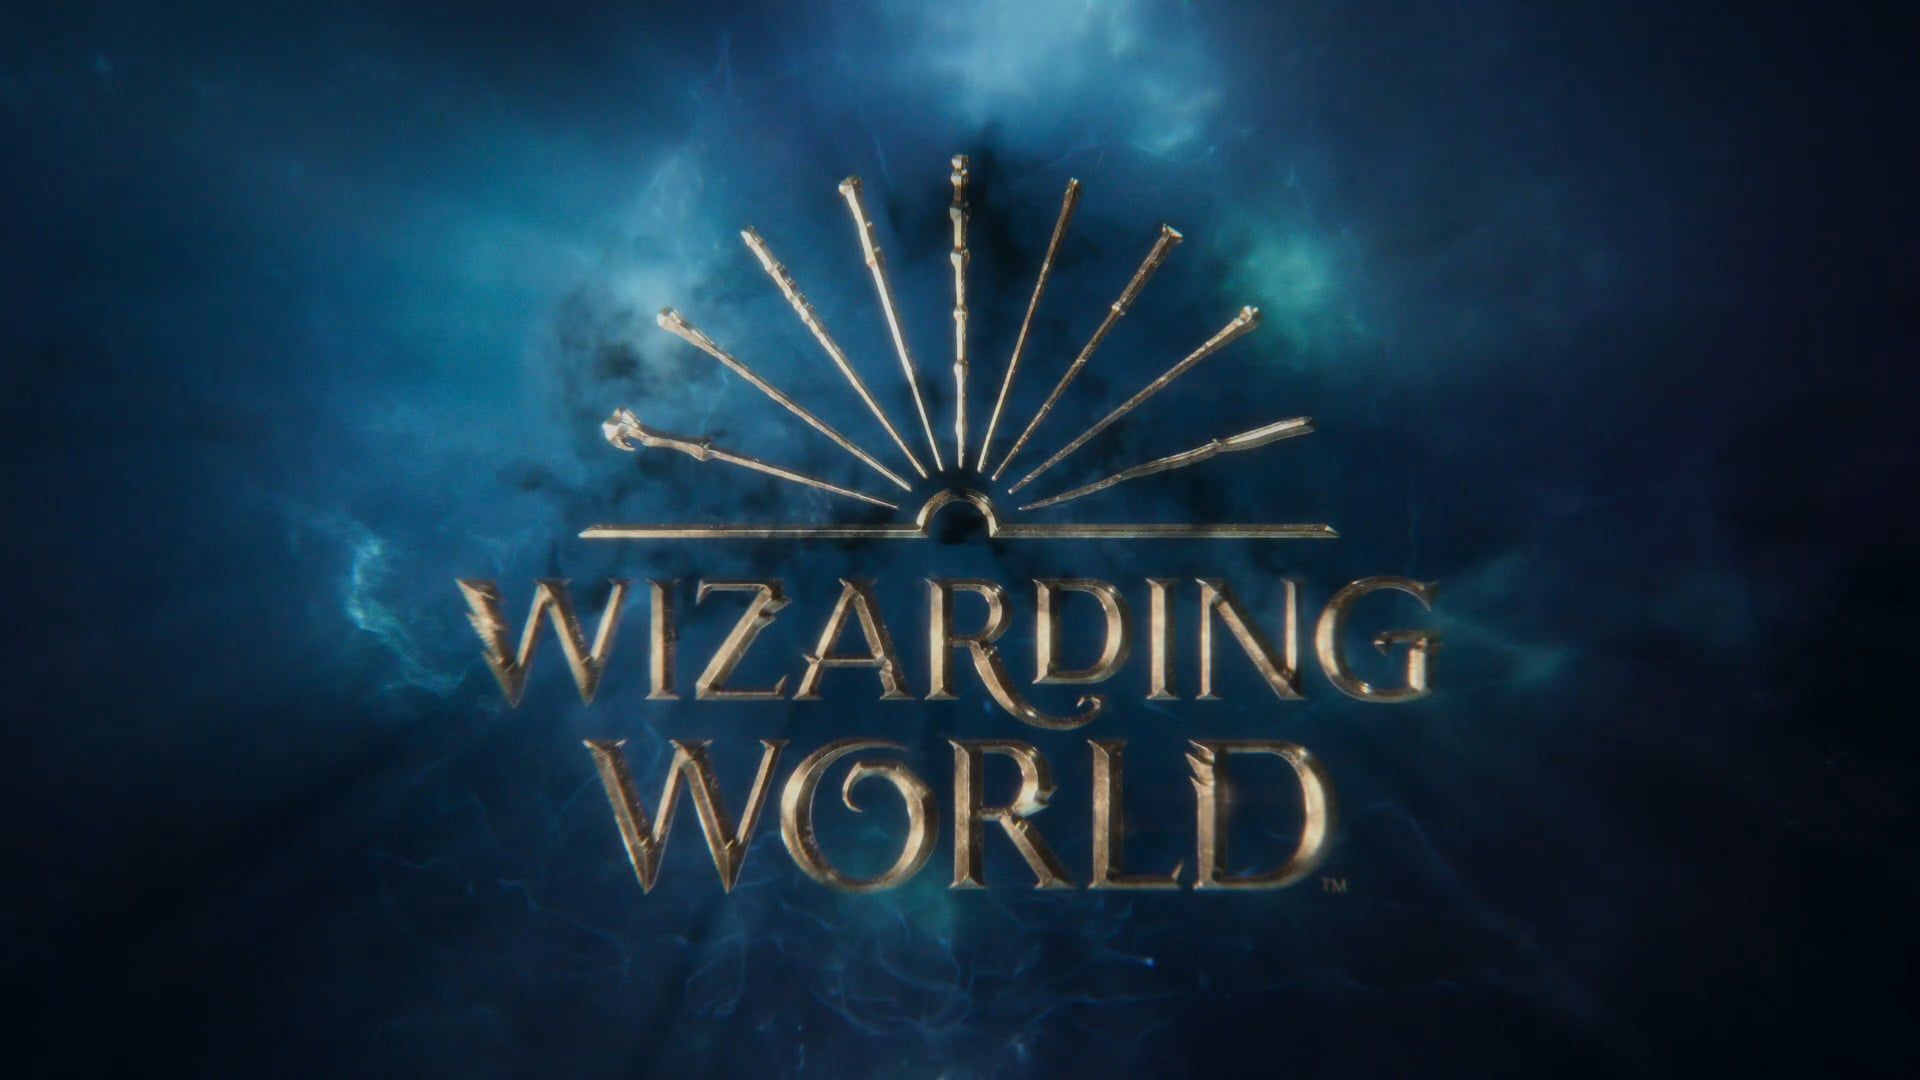 Is it possible to identify the wands in the Wizarding World logo? Fiction & Fantasy Stack Exchange